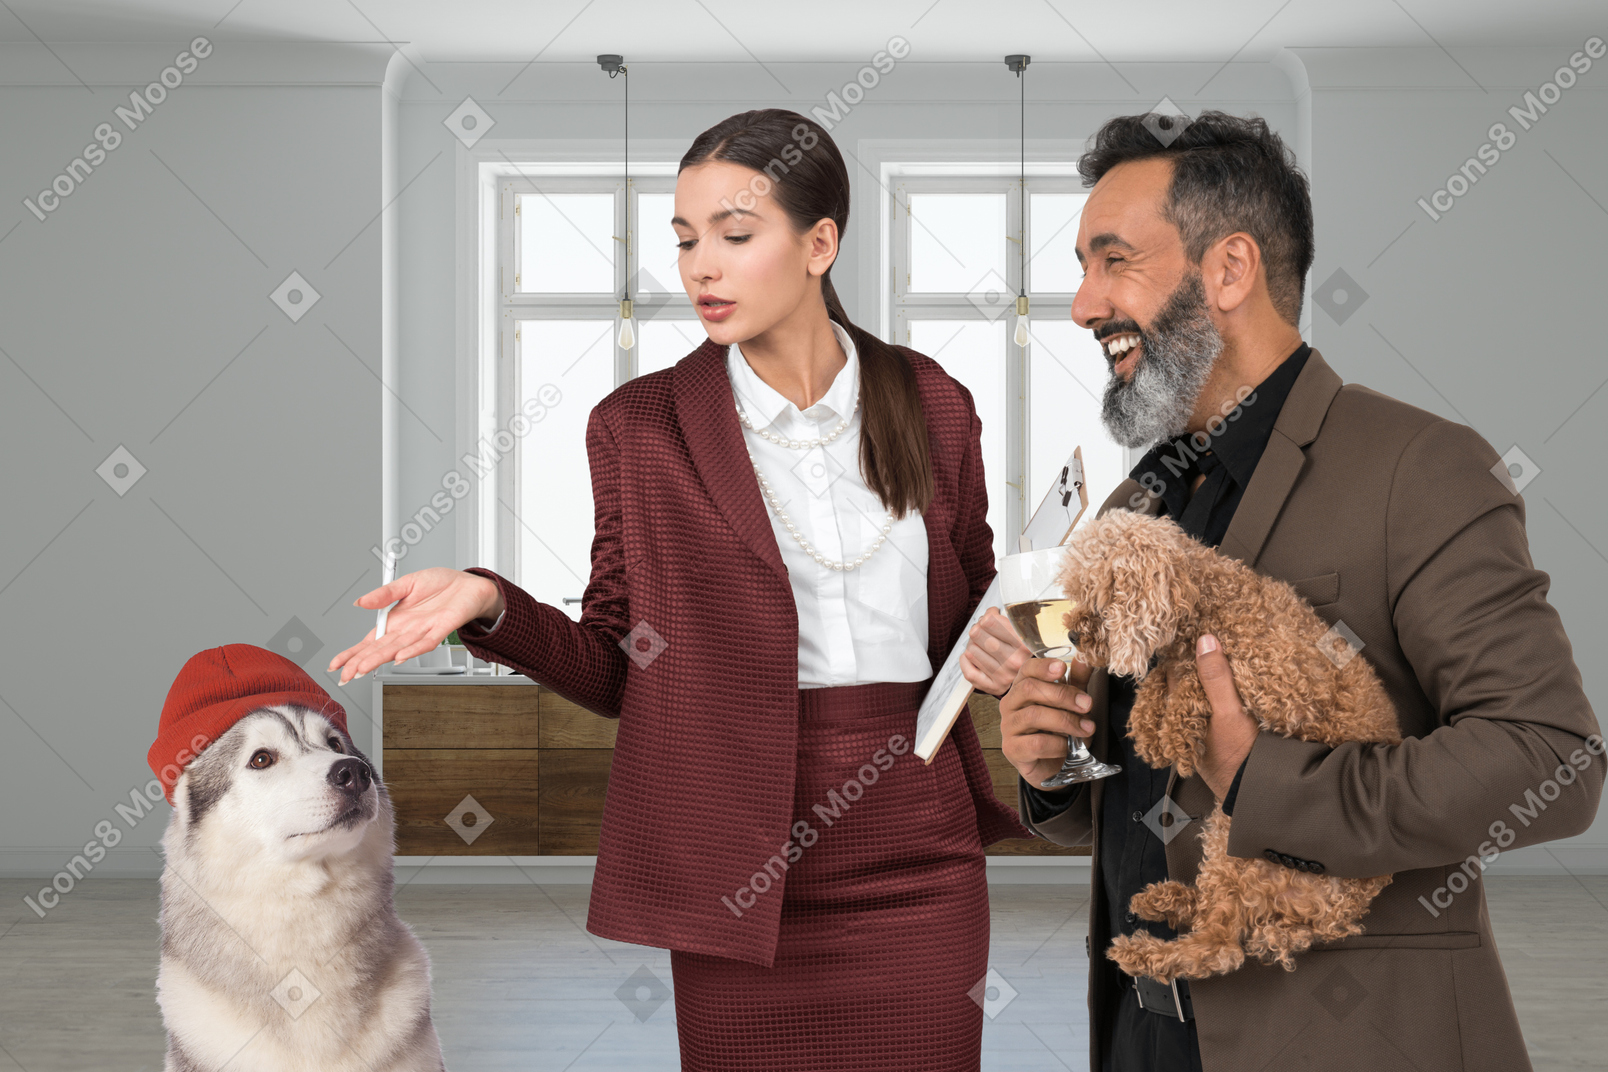 Woman and man with puppy standing next to dog in beanie